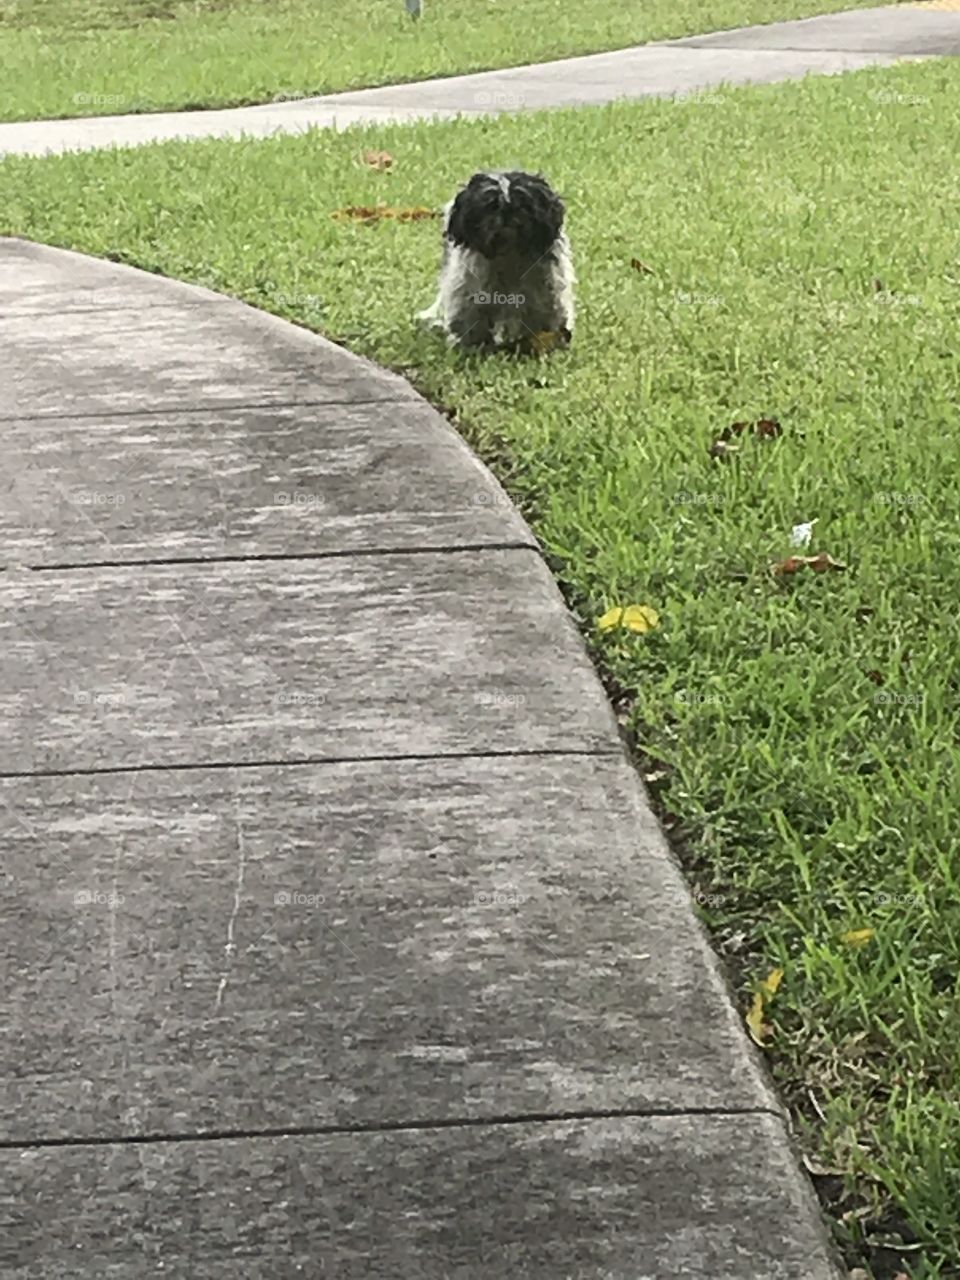 Do you like walking and you see a dog and you don’t know if it’s going to attack you well i was walking and seen this dog i was scared but it didn’t come to me 😂